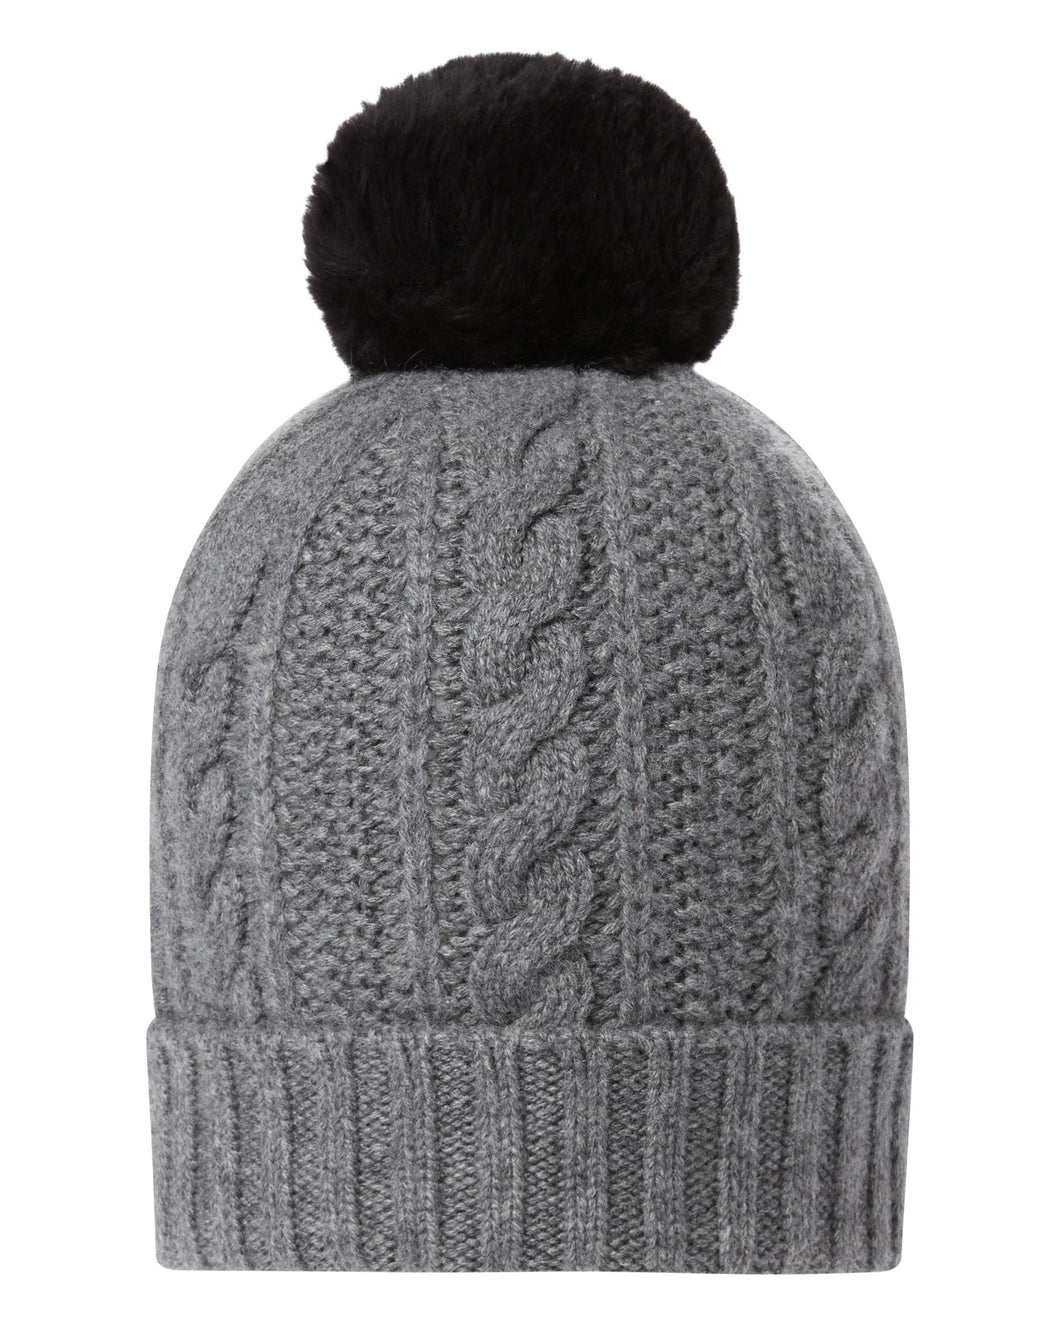 N.Peal Unisex Shearling Pom Cable Hat Elephant Grey